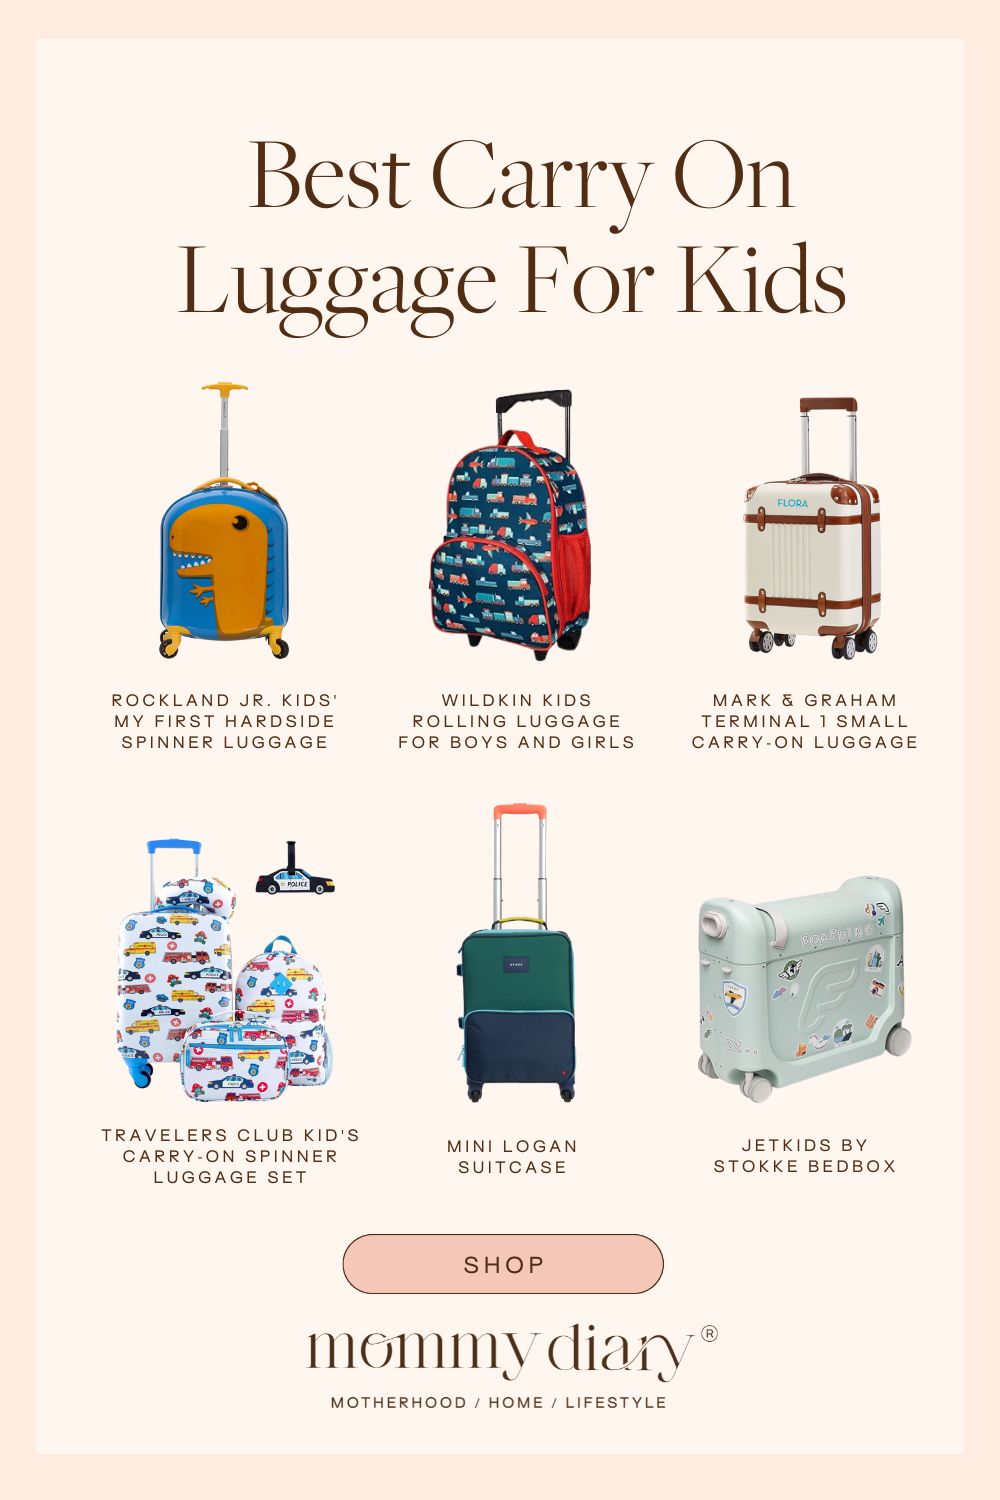 Best Carry On Luggage For Kids